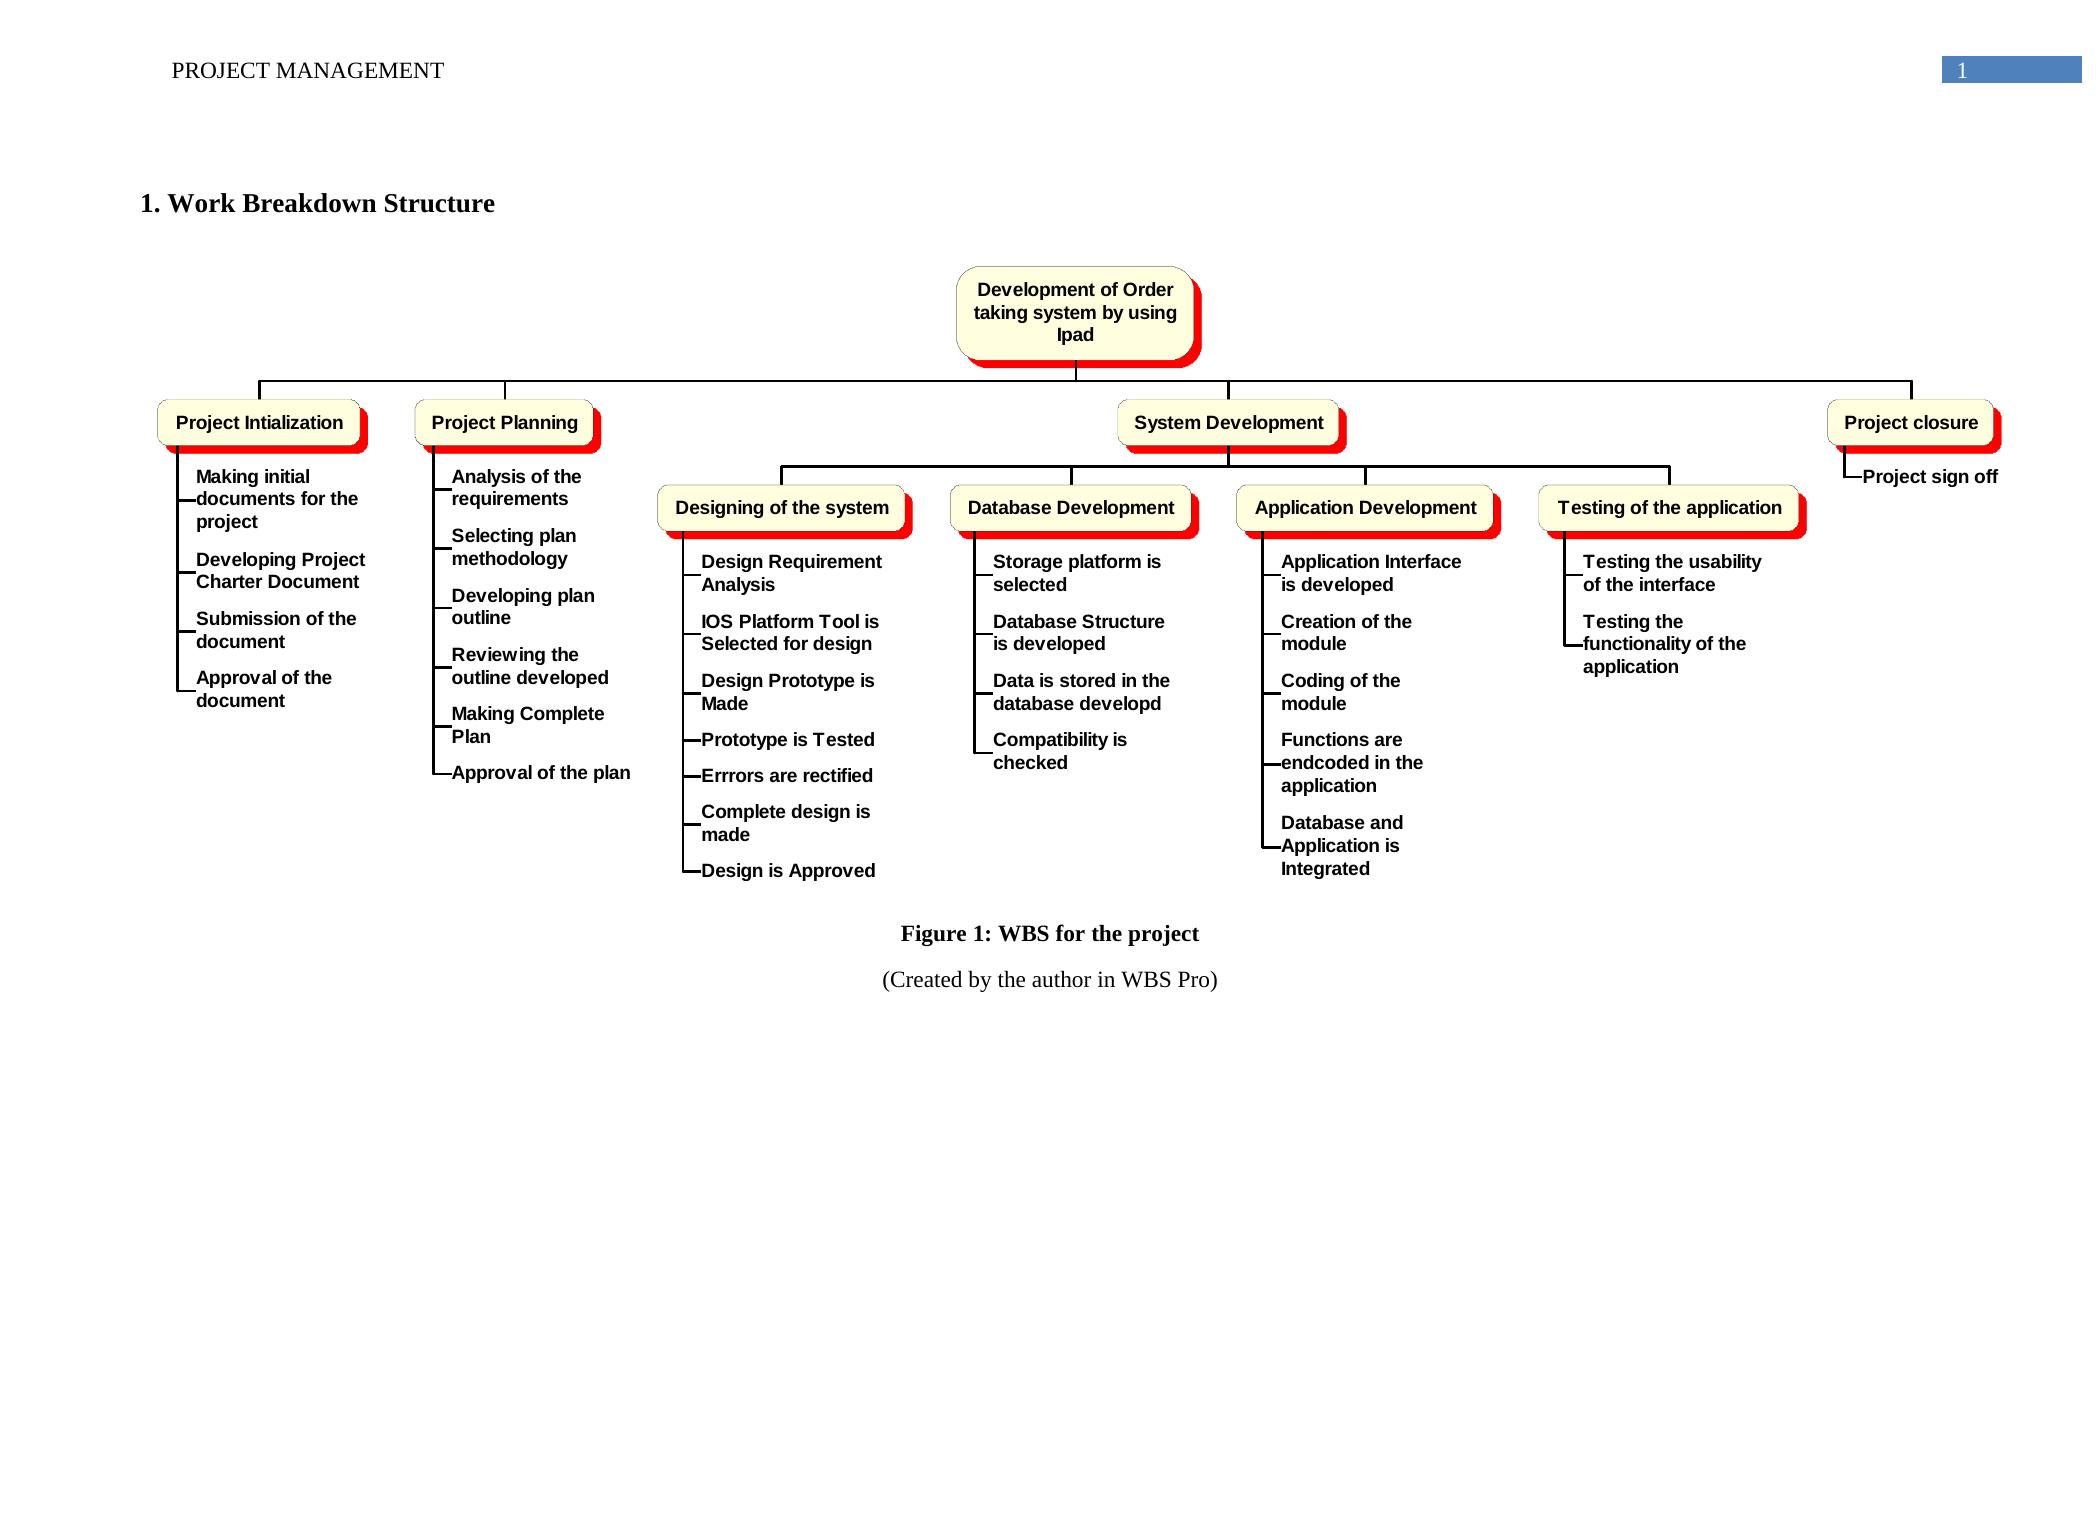 Work Breakdown Structure for Project Management Project Management_2